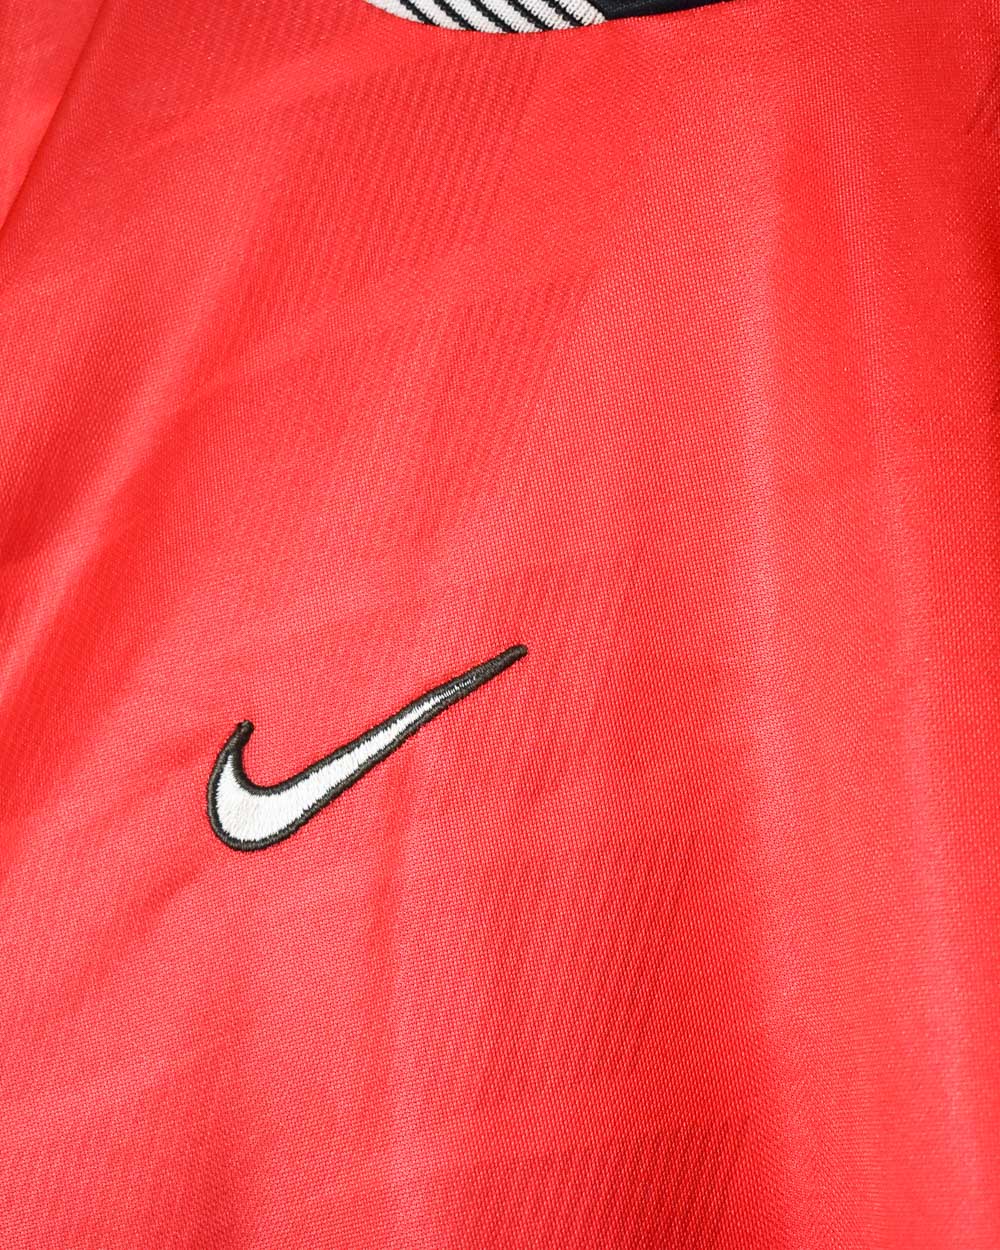 Red Nike Team Long Sleeved T-Shirt - Large